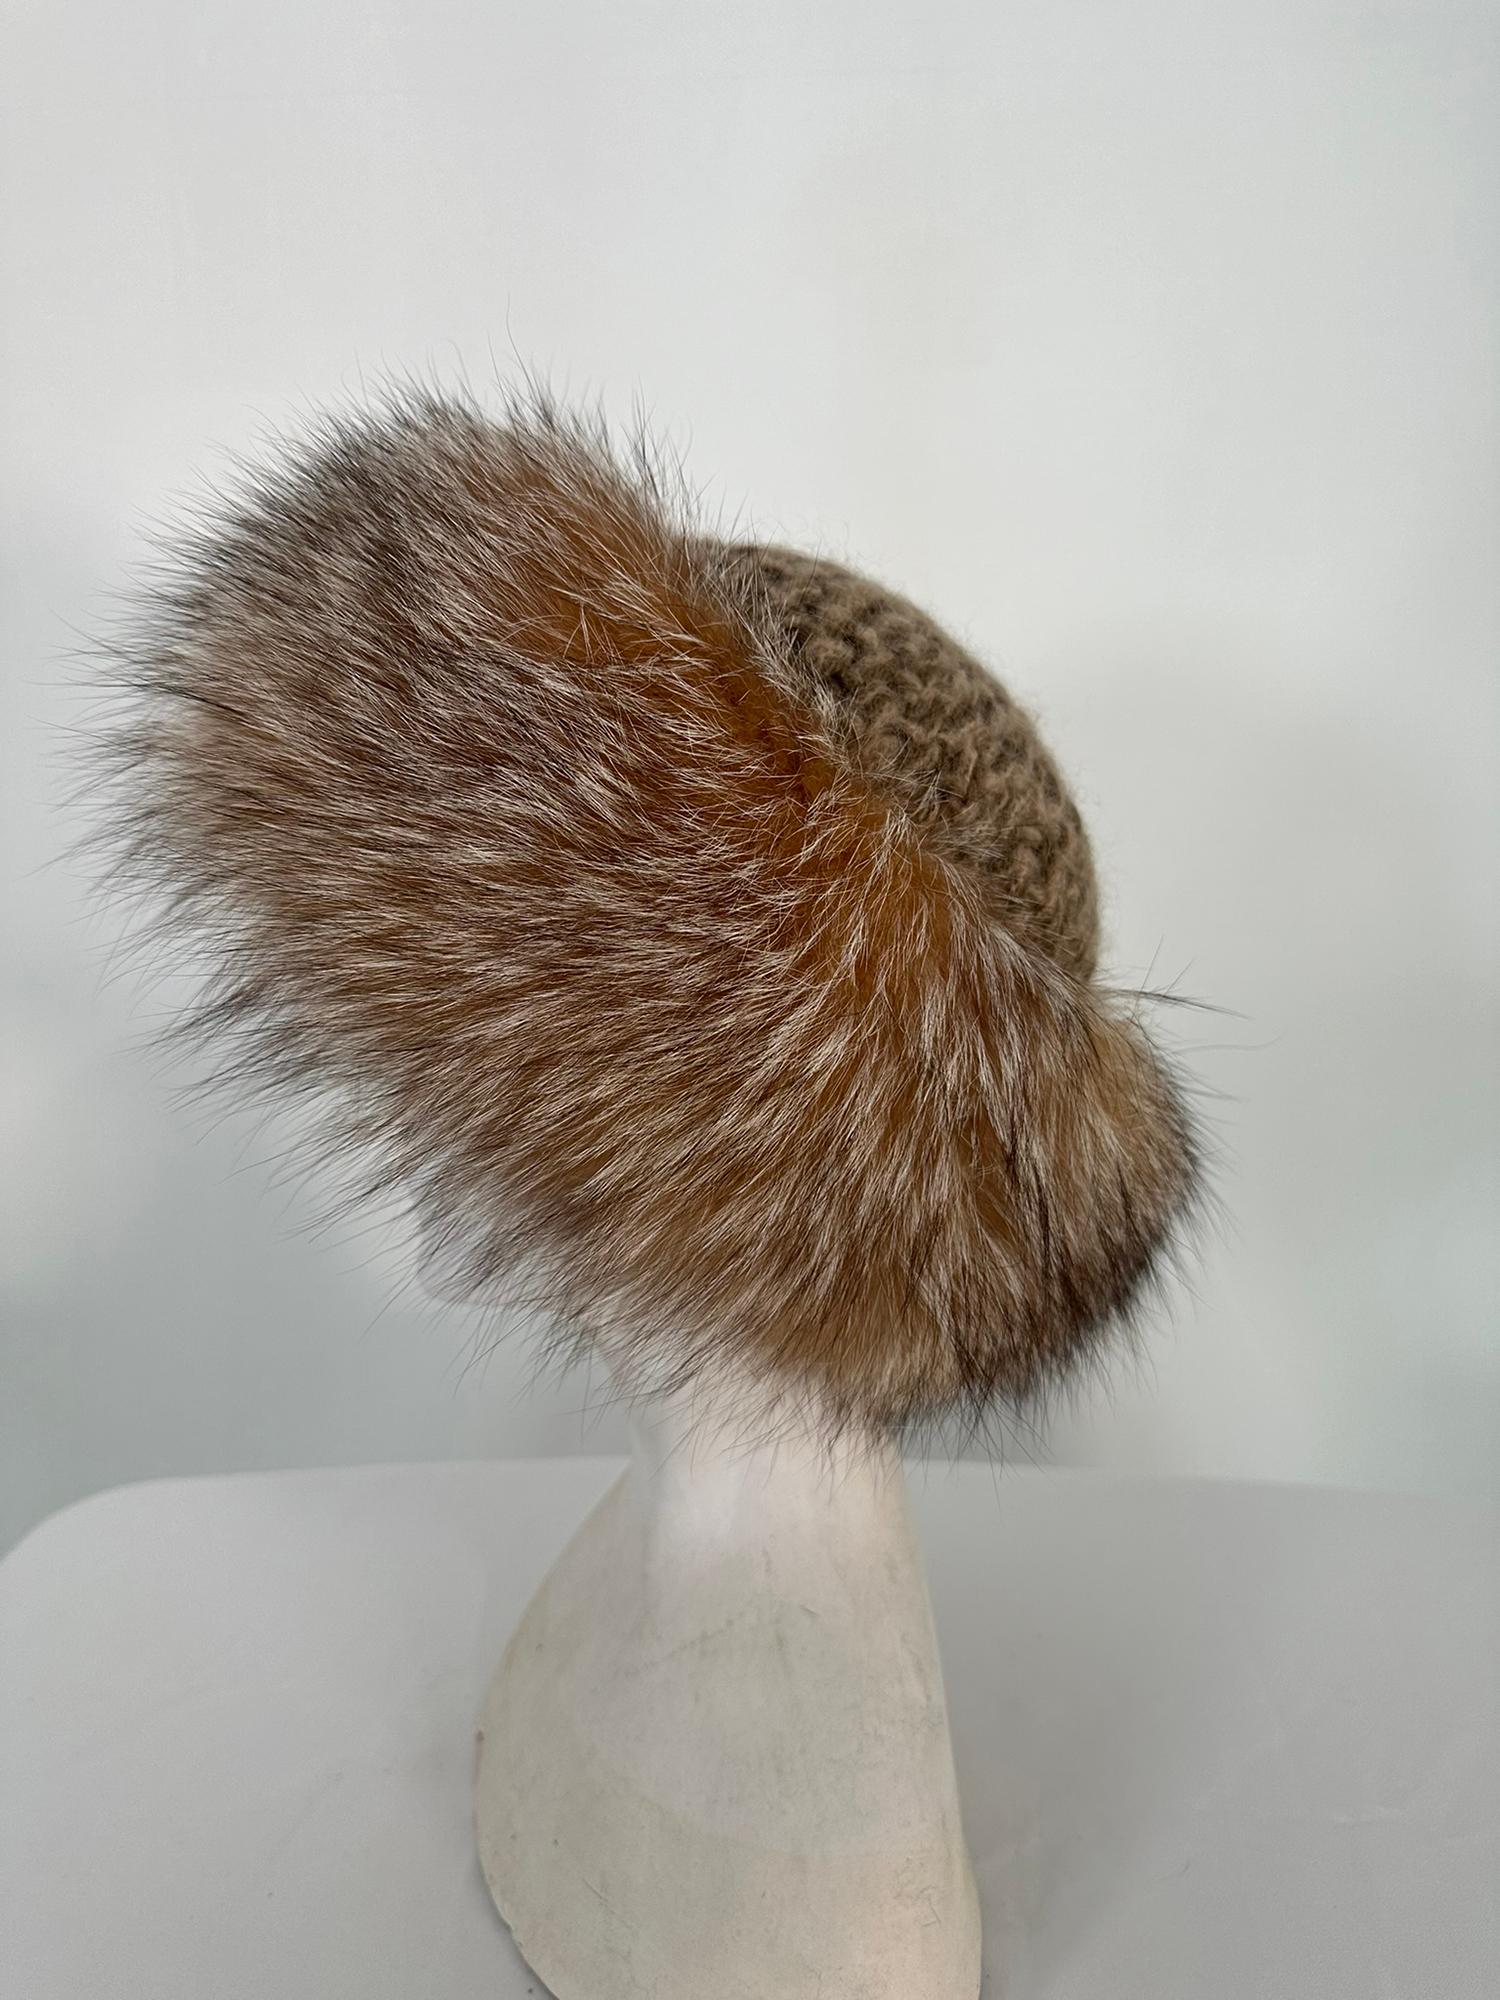 1970s chunky wool knit hat with fox fur trim. Natural variegated earth tones wool cap with a deep band of red fox fur to cover your ears. The inside edge has a black grosgrain ribbon.
In excellent pre-owned condition. Fits a size 22 1/2.